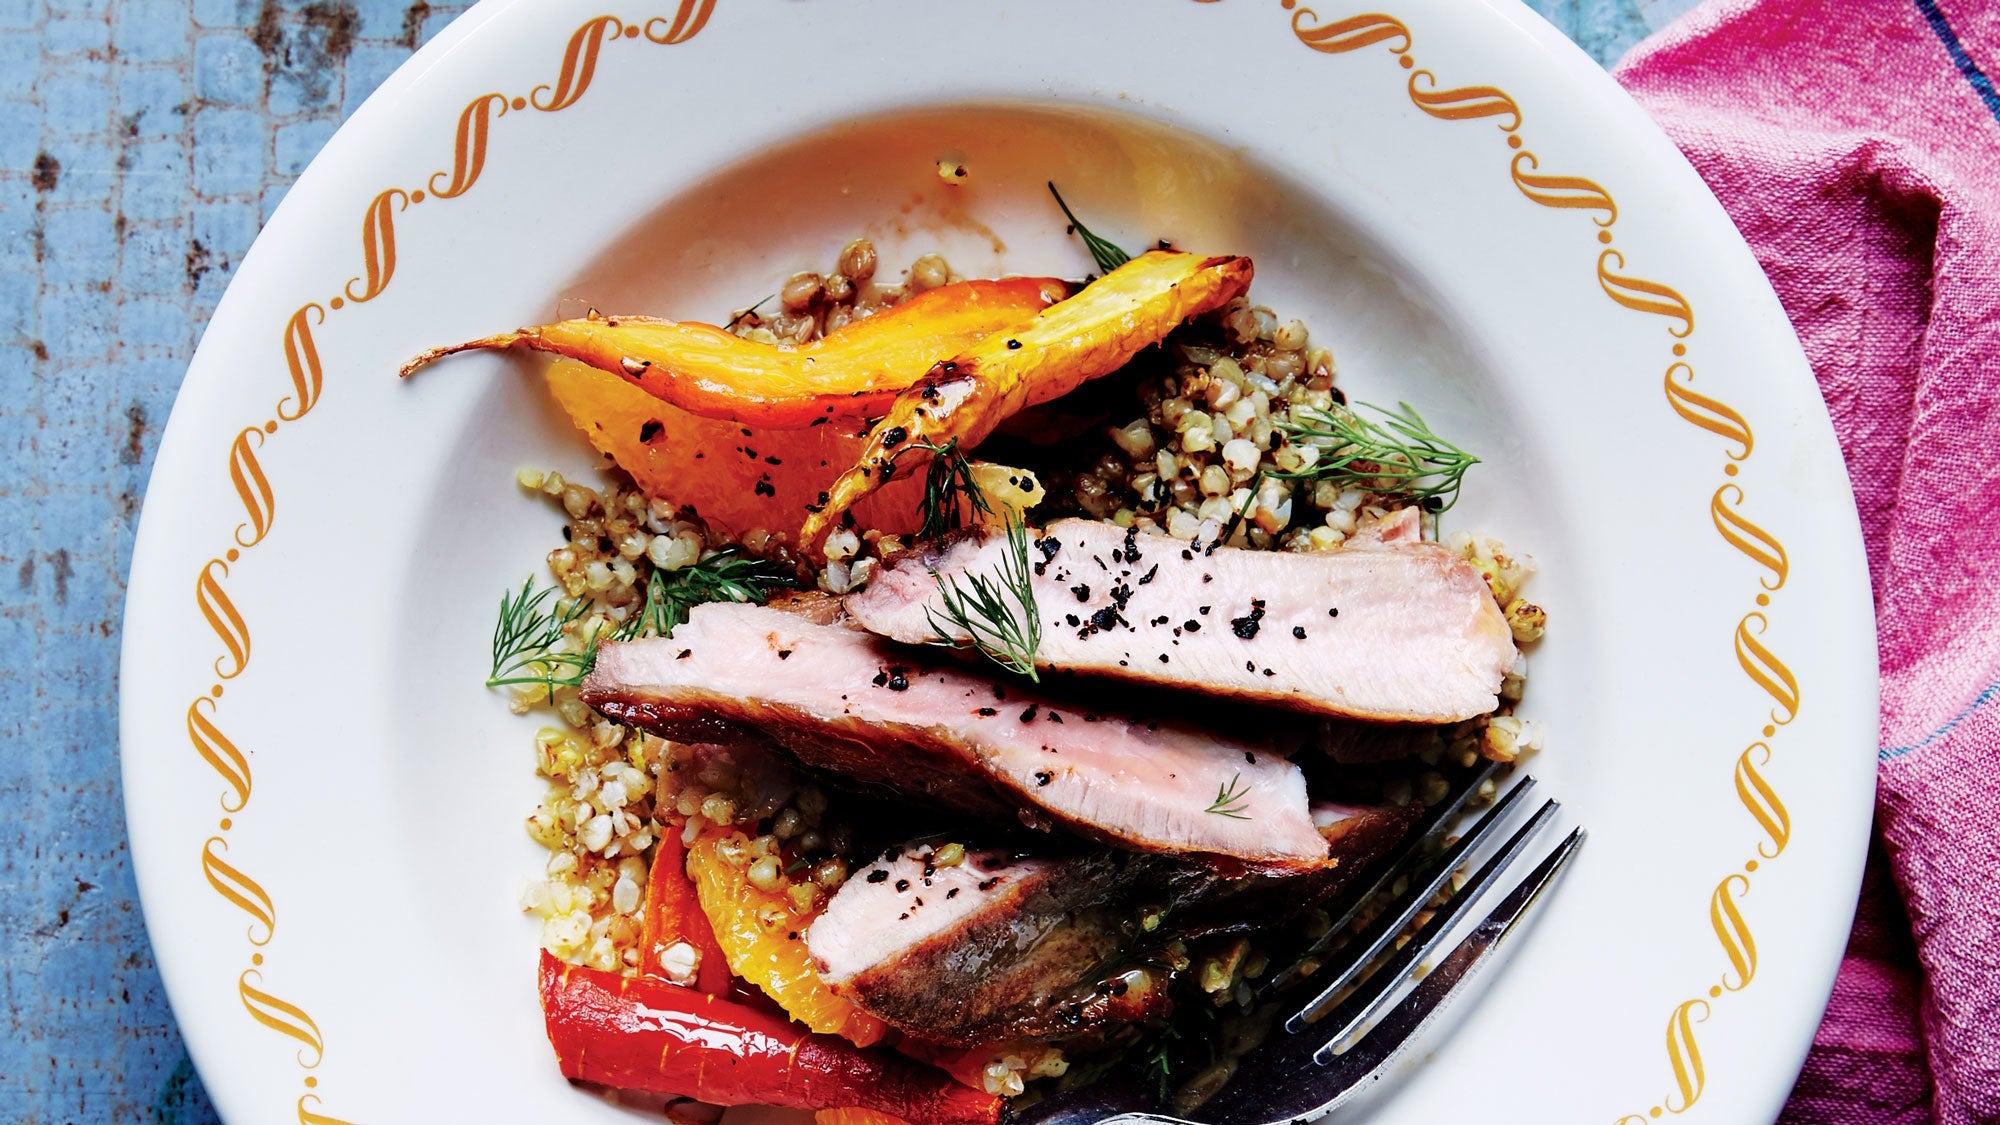 Pork Chops with Carrots and Toasted Buckwheat